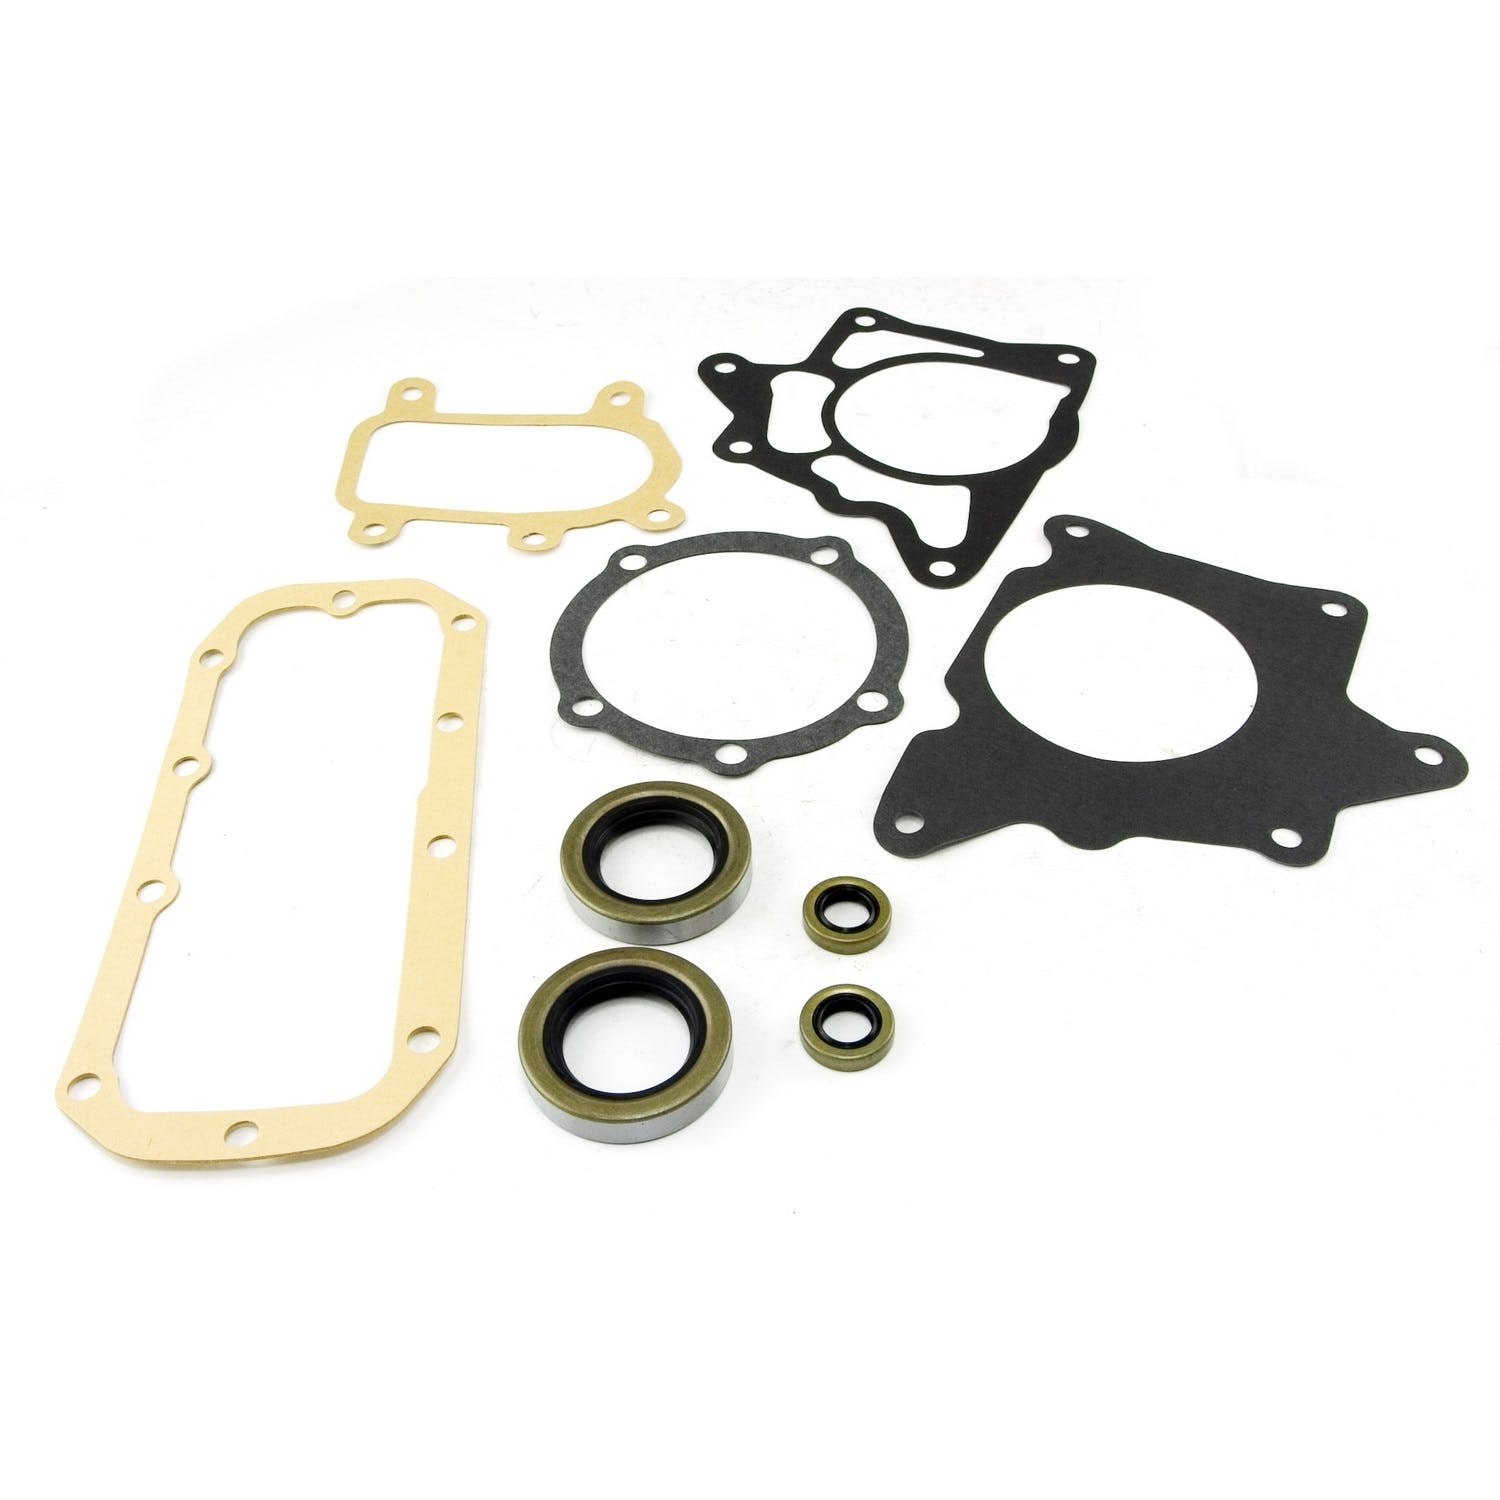 Omix-ADA 18603.02 Transfer Case Gasket and Seal Kit